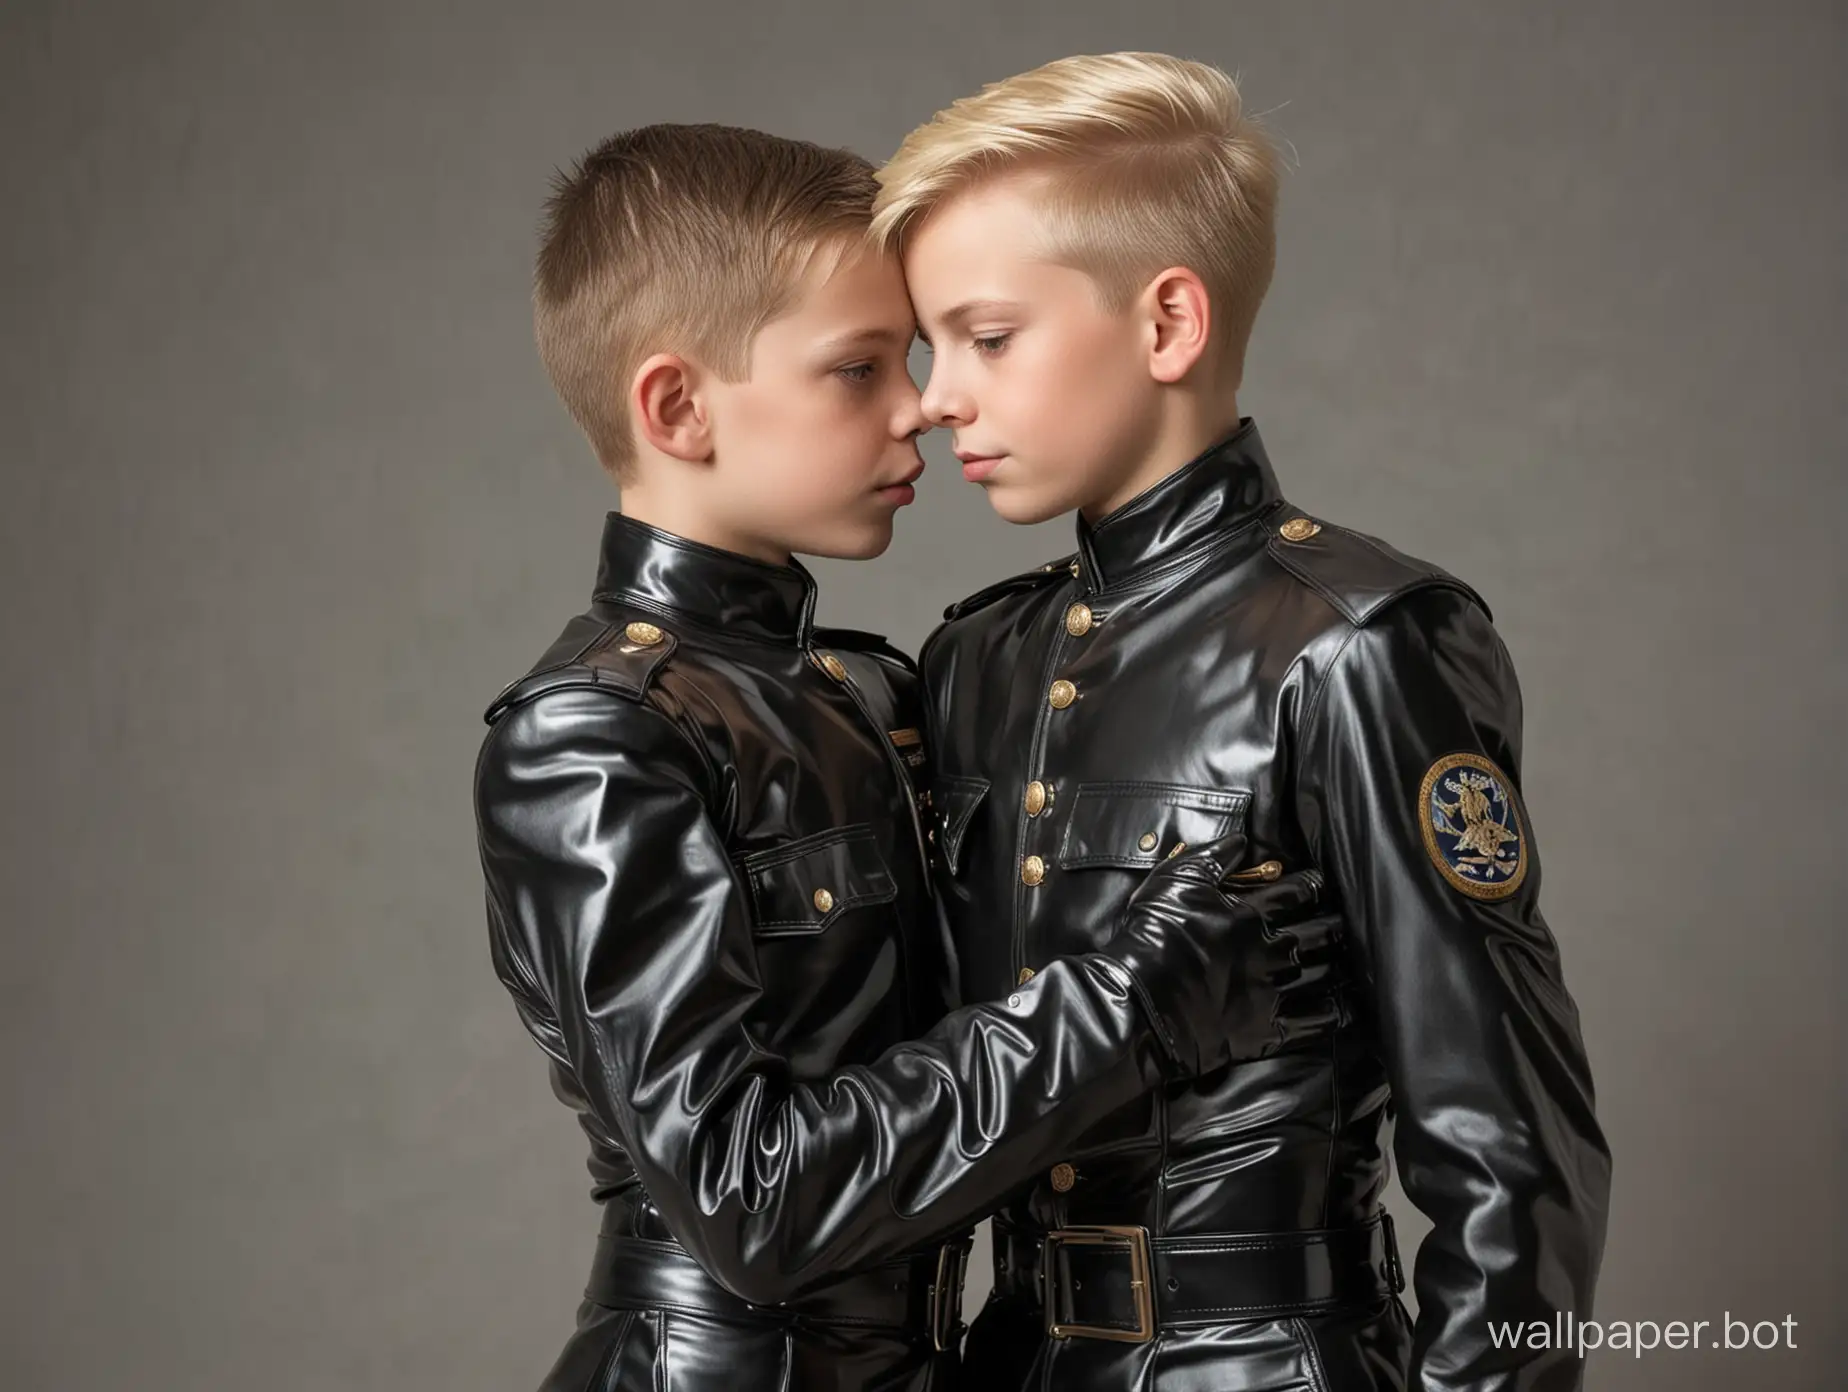 Young-Boys-Embracing-in-Latex-Soldier-Uniforms